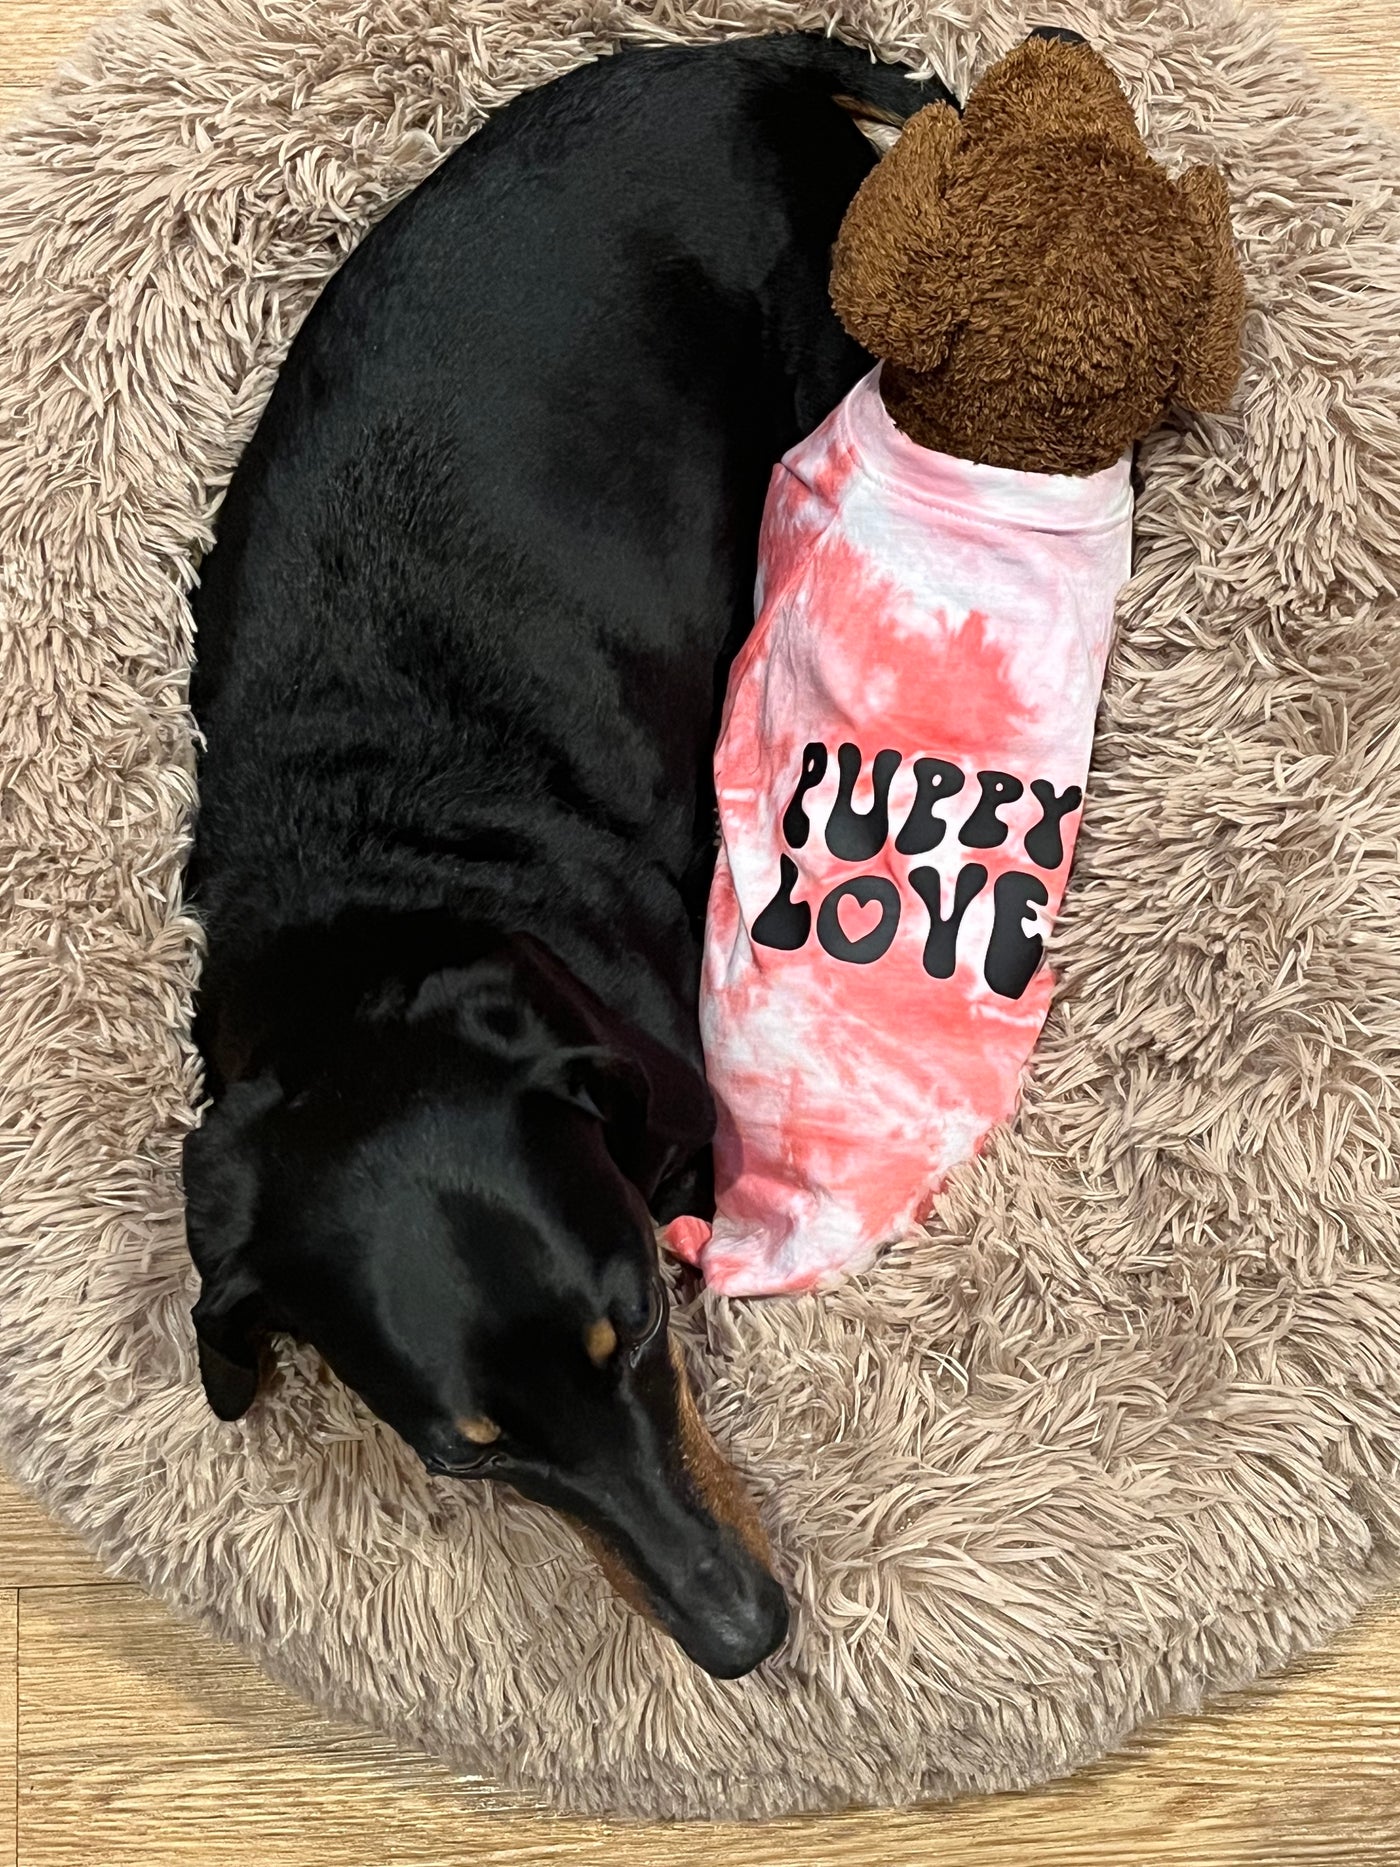 Tie-Dye Shirt for Pets - Puppy Love